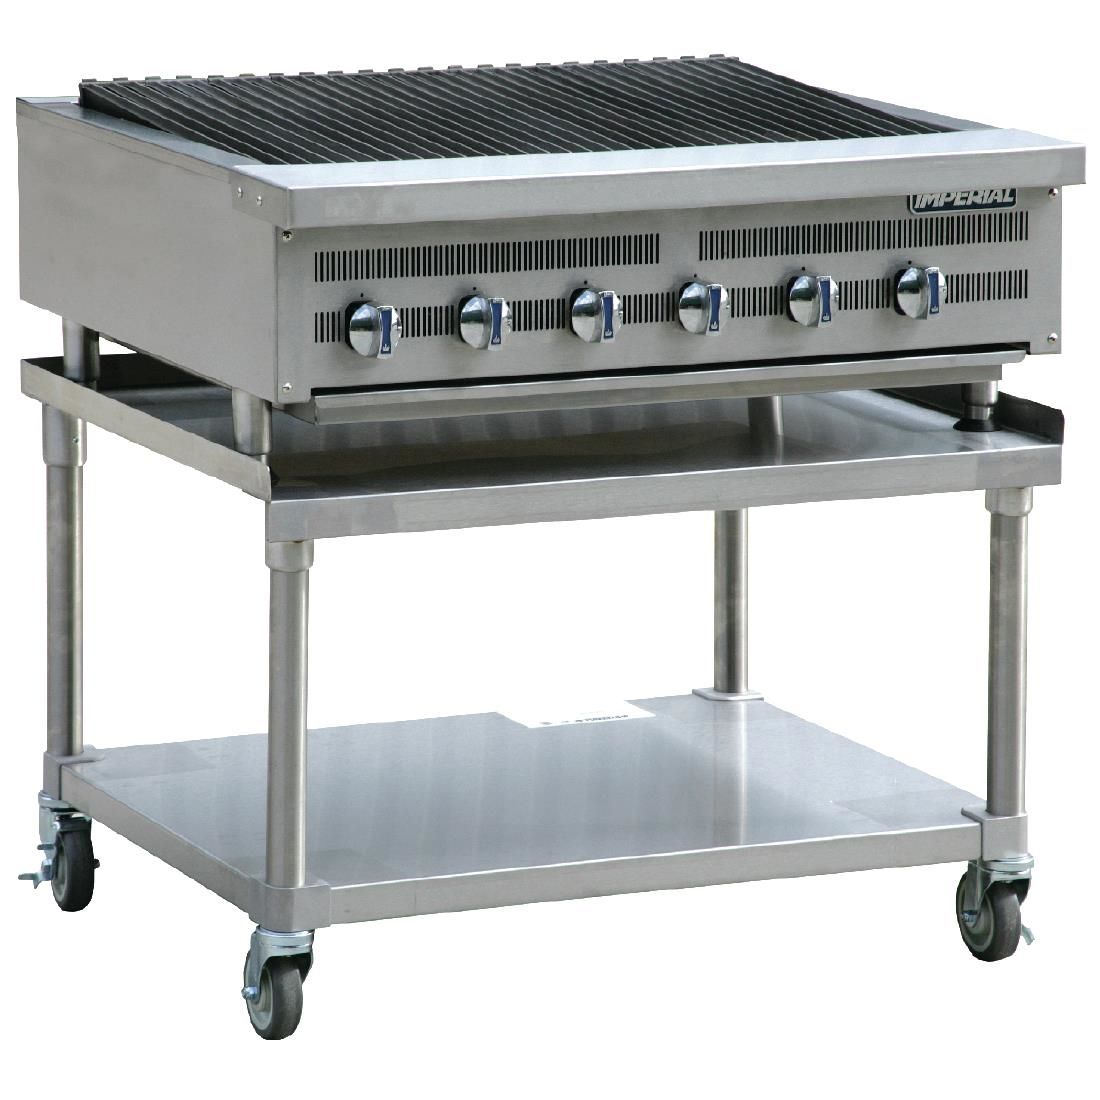 Imperial Radiant Chargrill IRBS-36 JD Catering Equipment Solutions Ltd